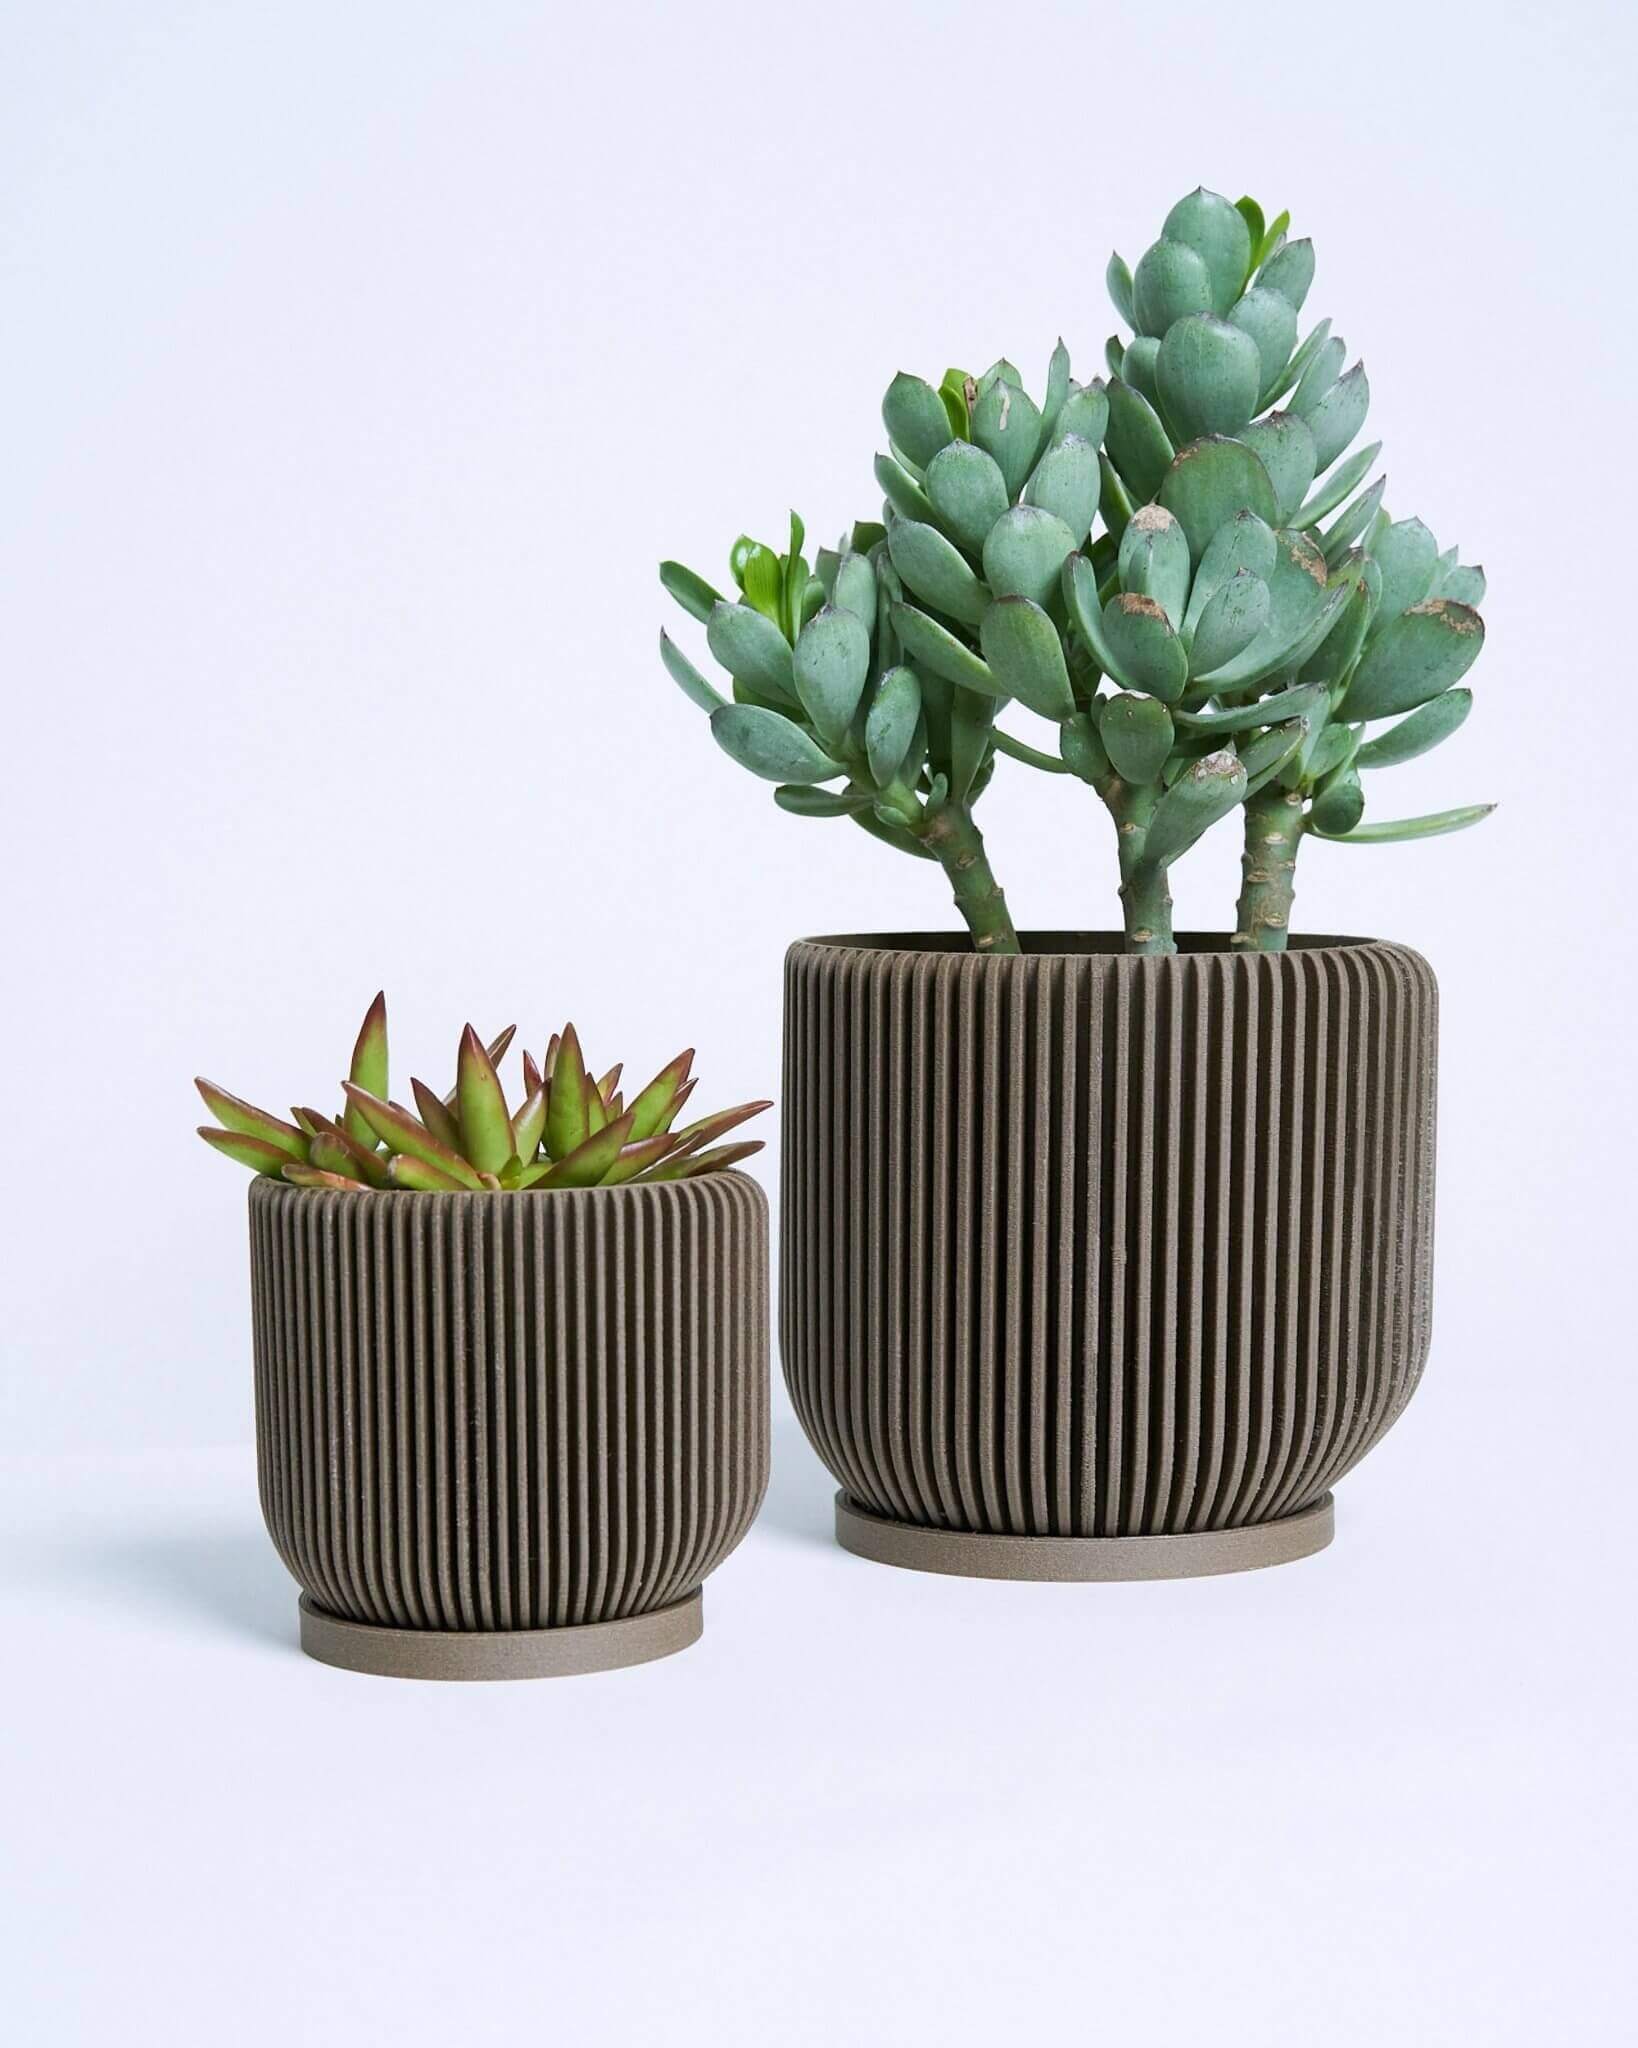 Two brown IONIC pots for planting succulents.